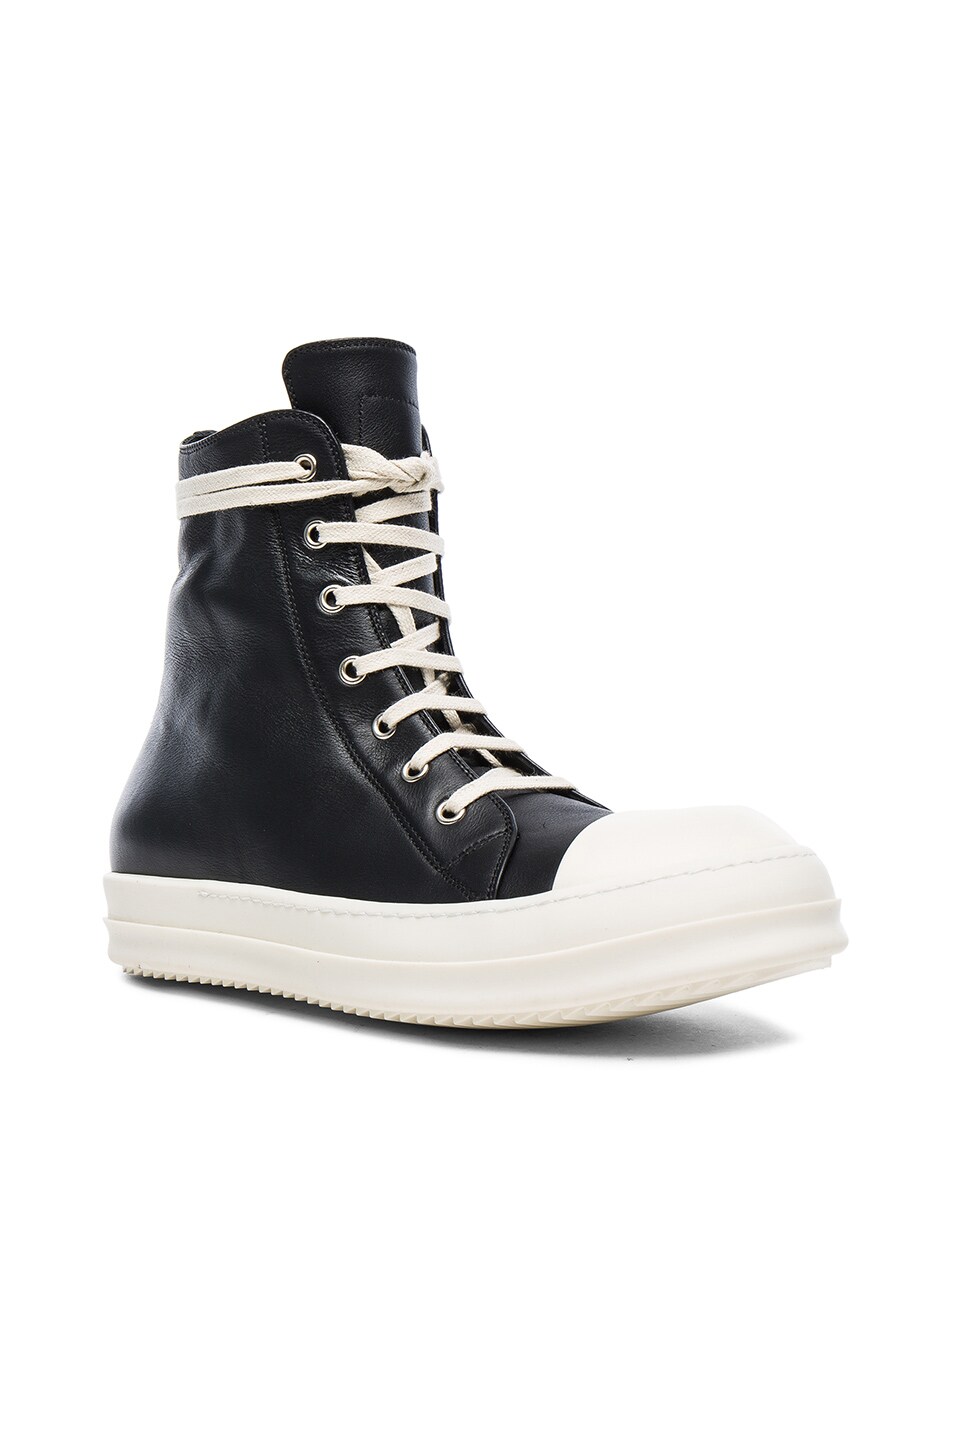 Image 1 of Rick Owens Leather Sneakers in Black & White